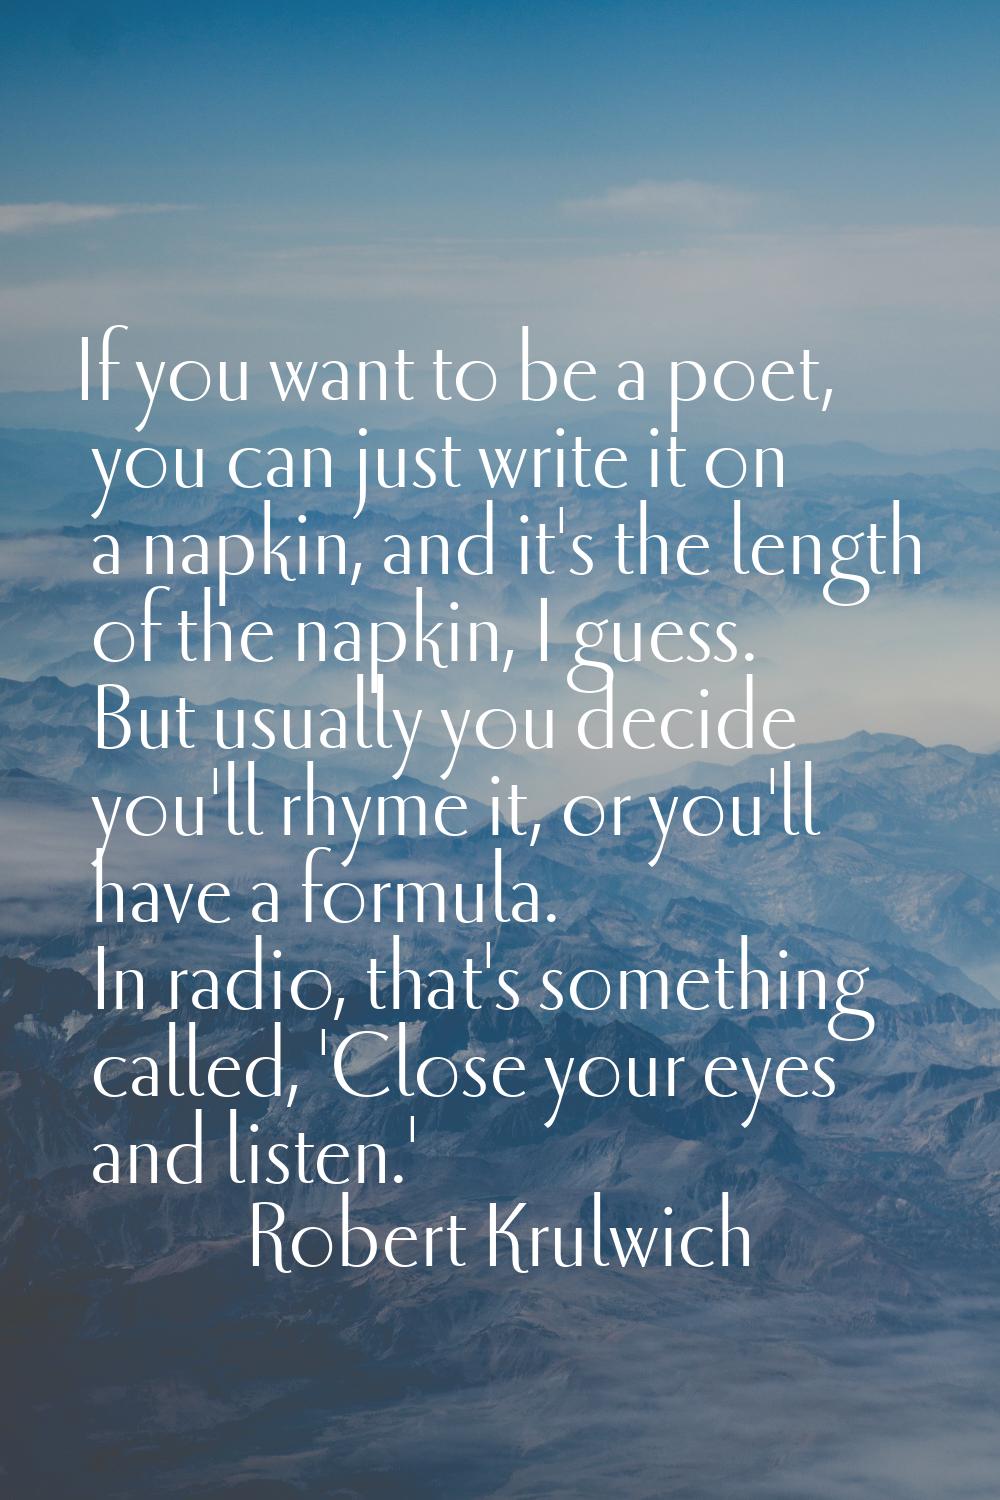 If you want to be a poet, you can just write it on a napkin, and it's the length of the napkin, I g